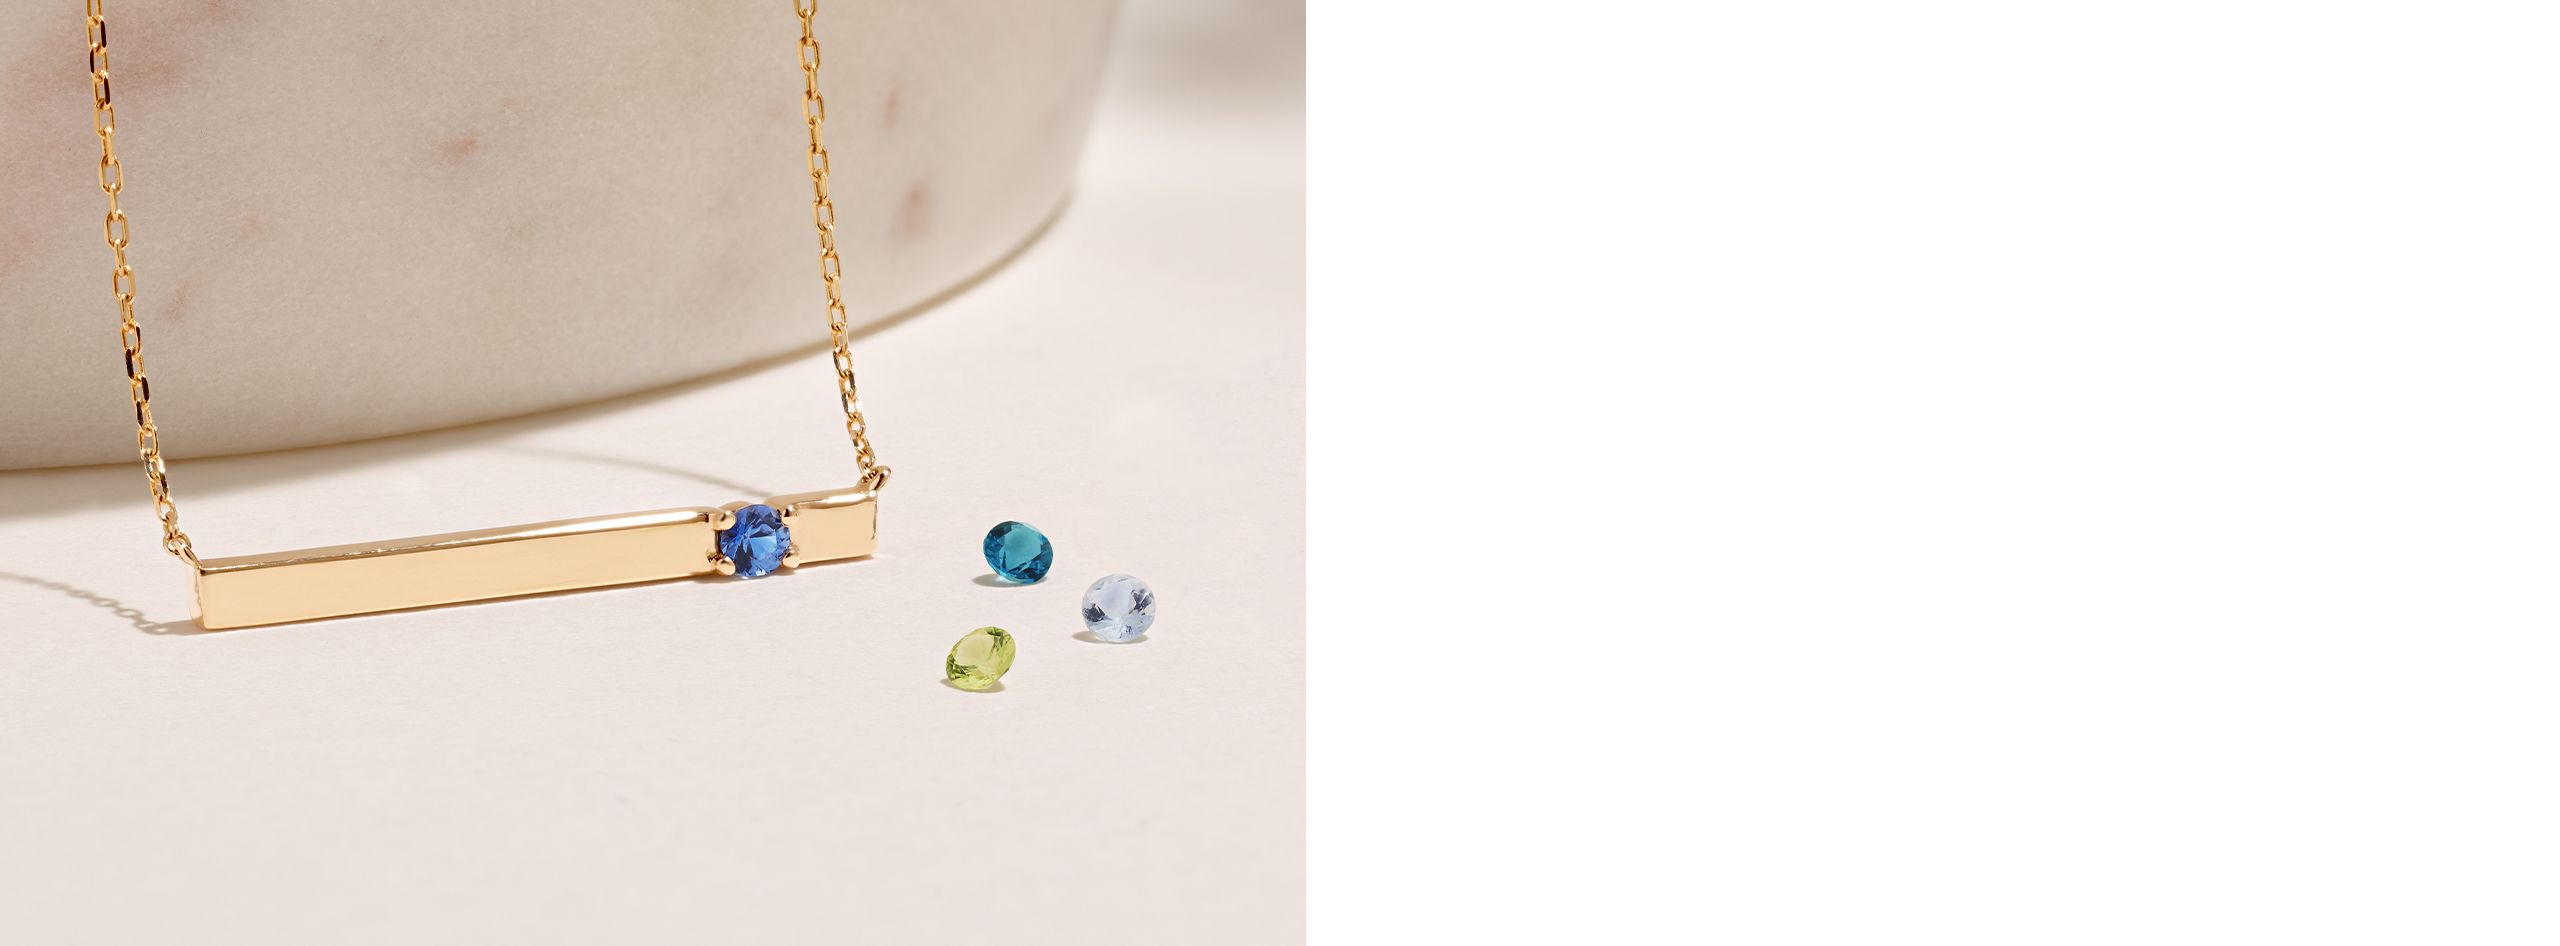 A collection of gemstones with a gold bar necklace